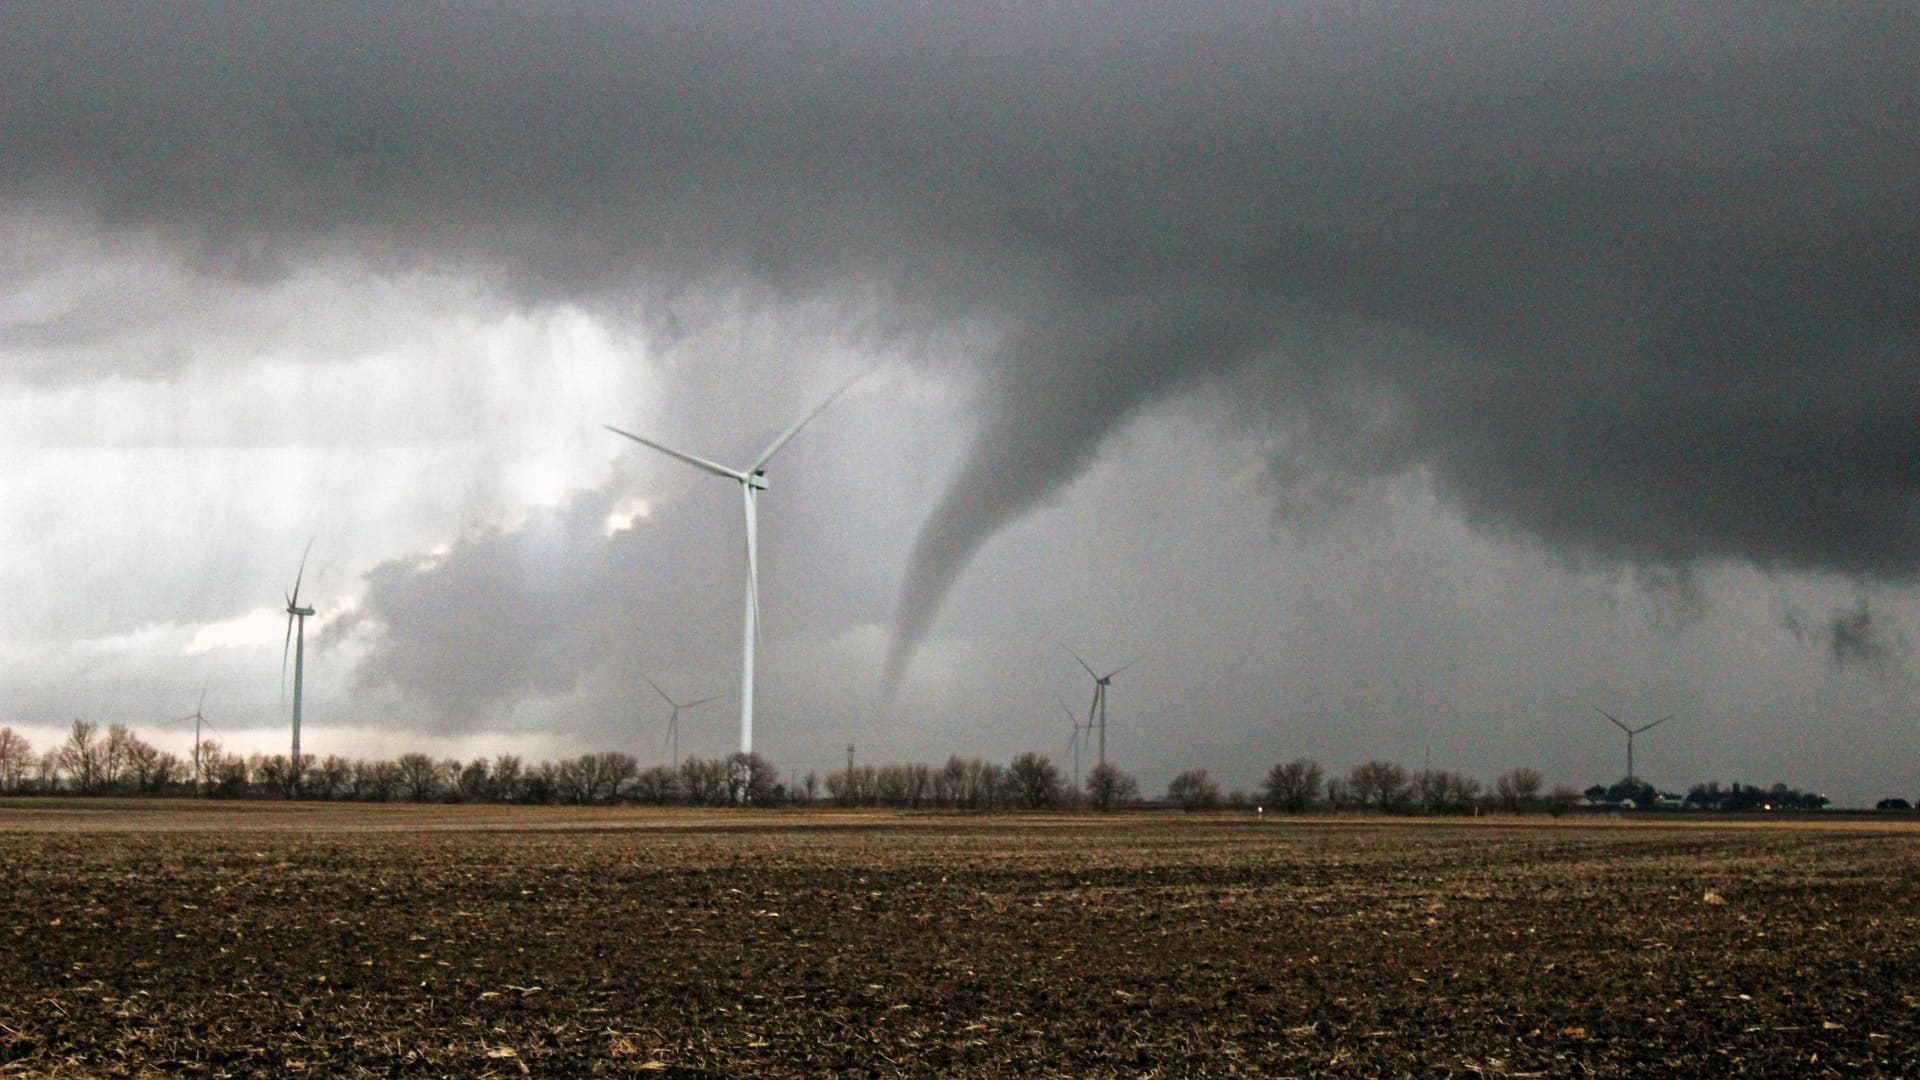 Tornado Alley is creeping into new territory